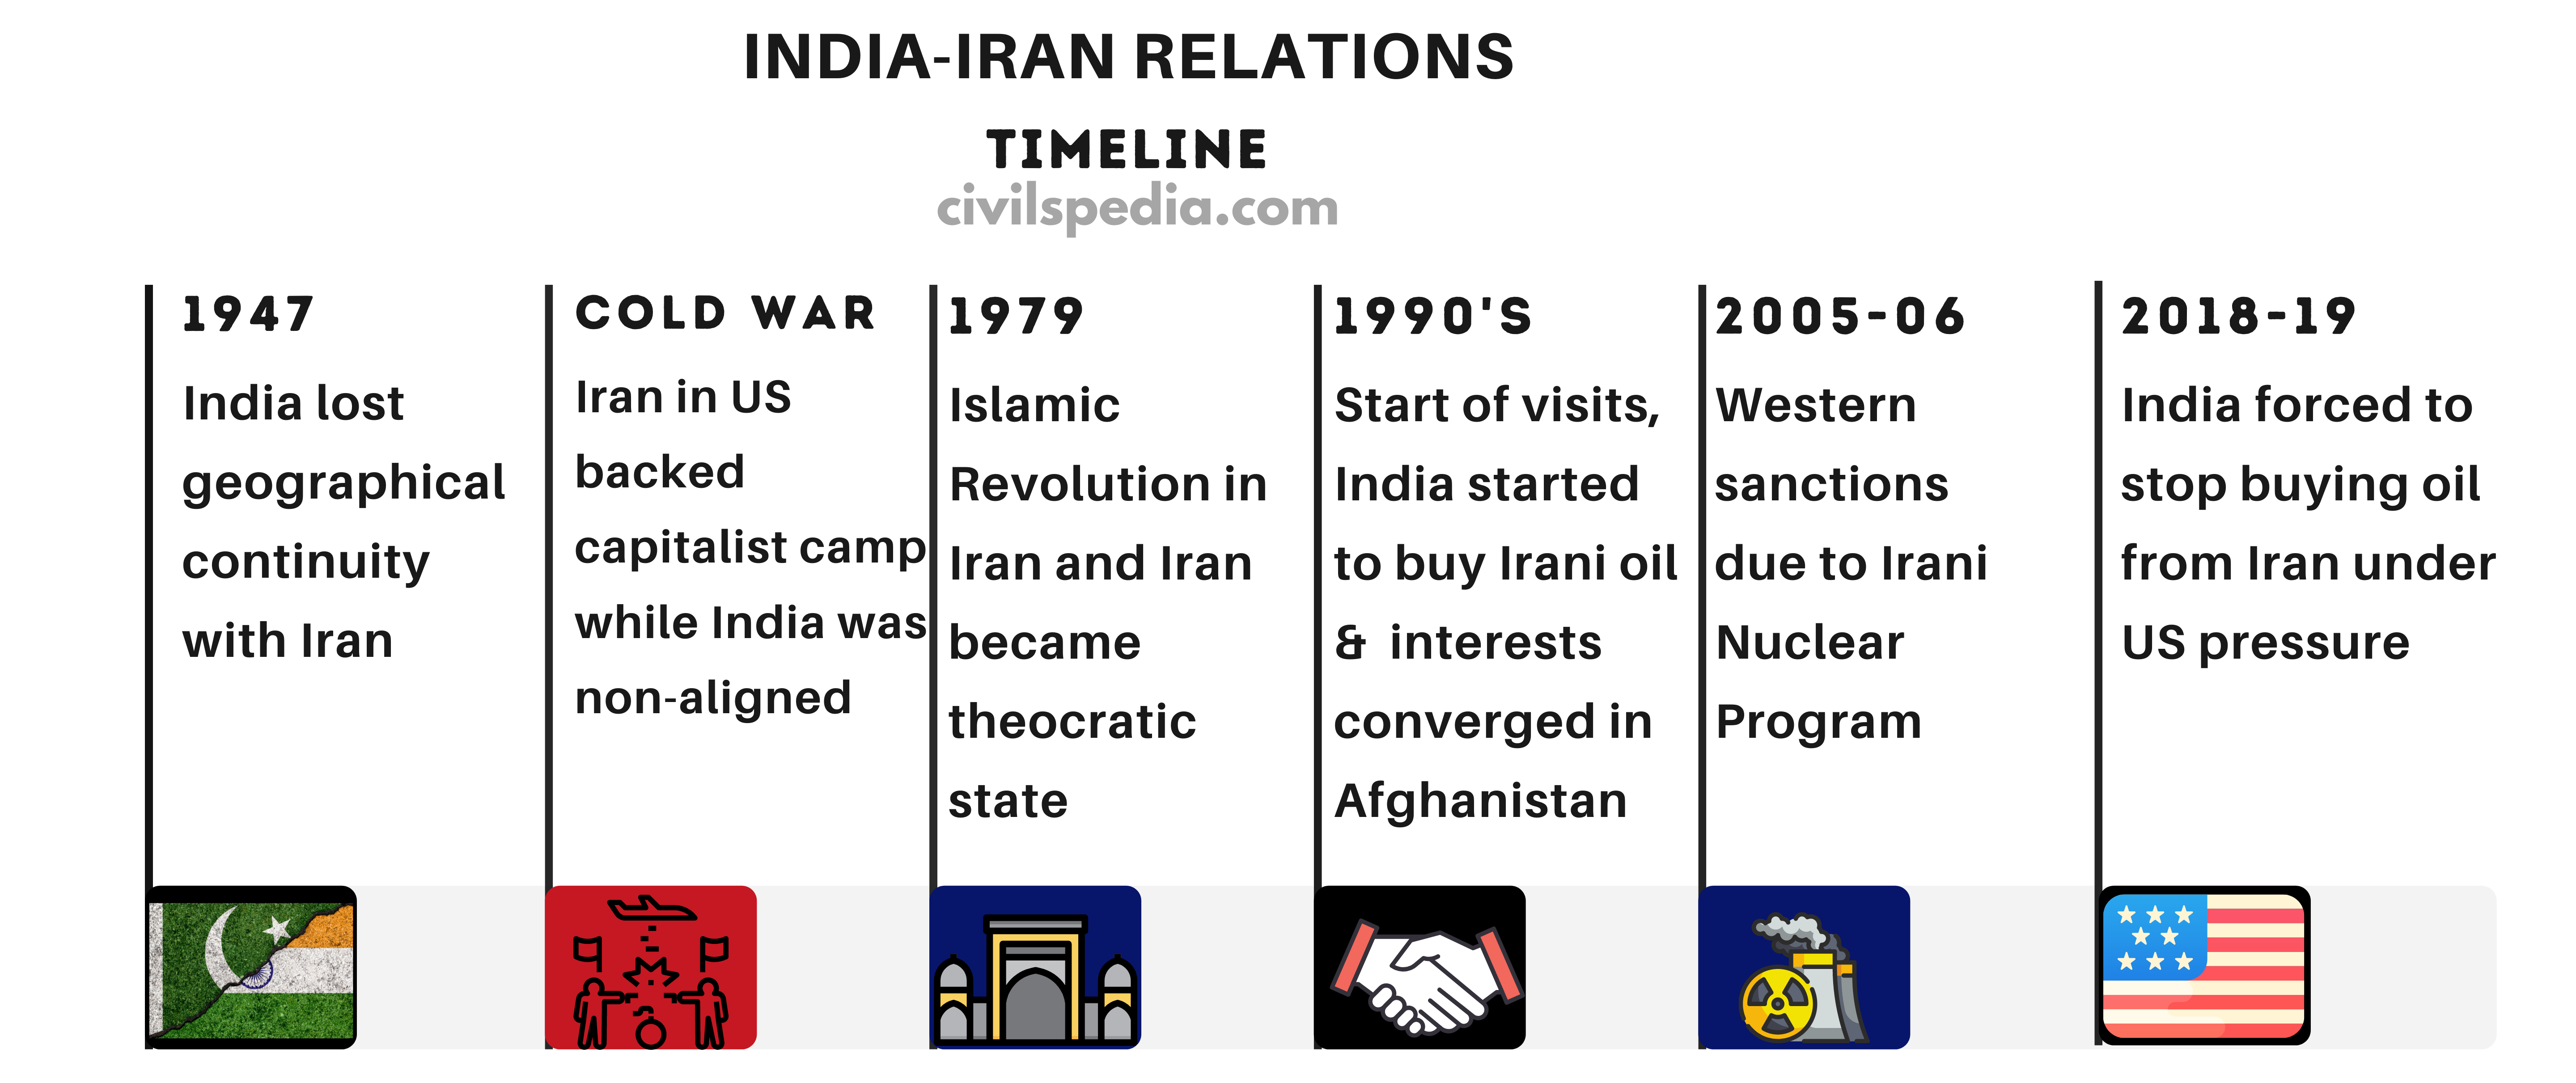 Timeline of India-Iran Relations